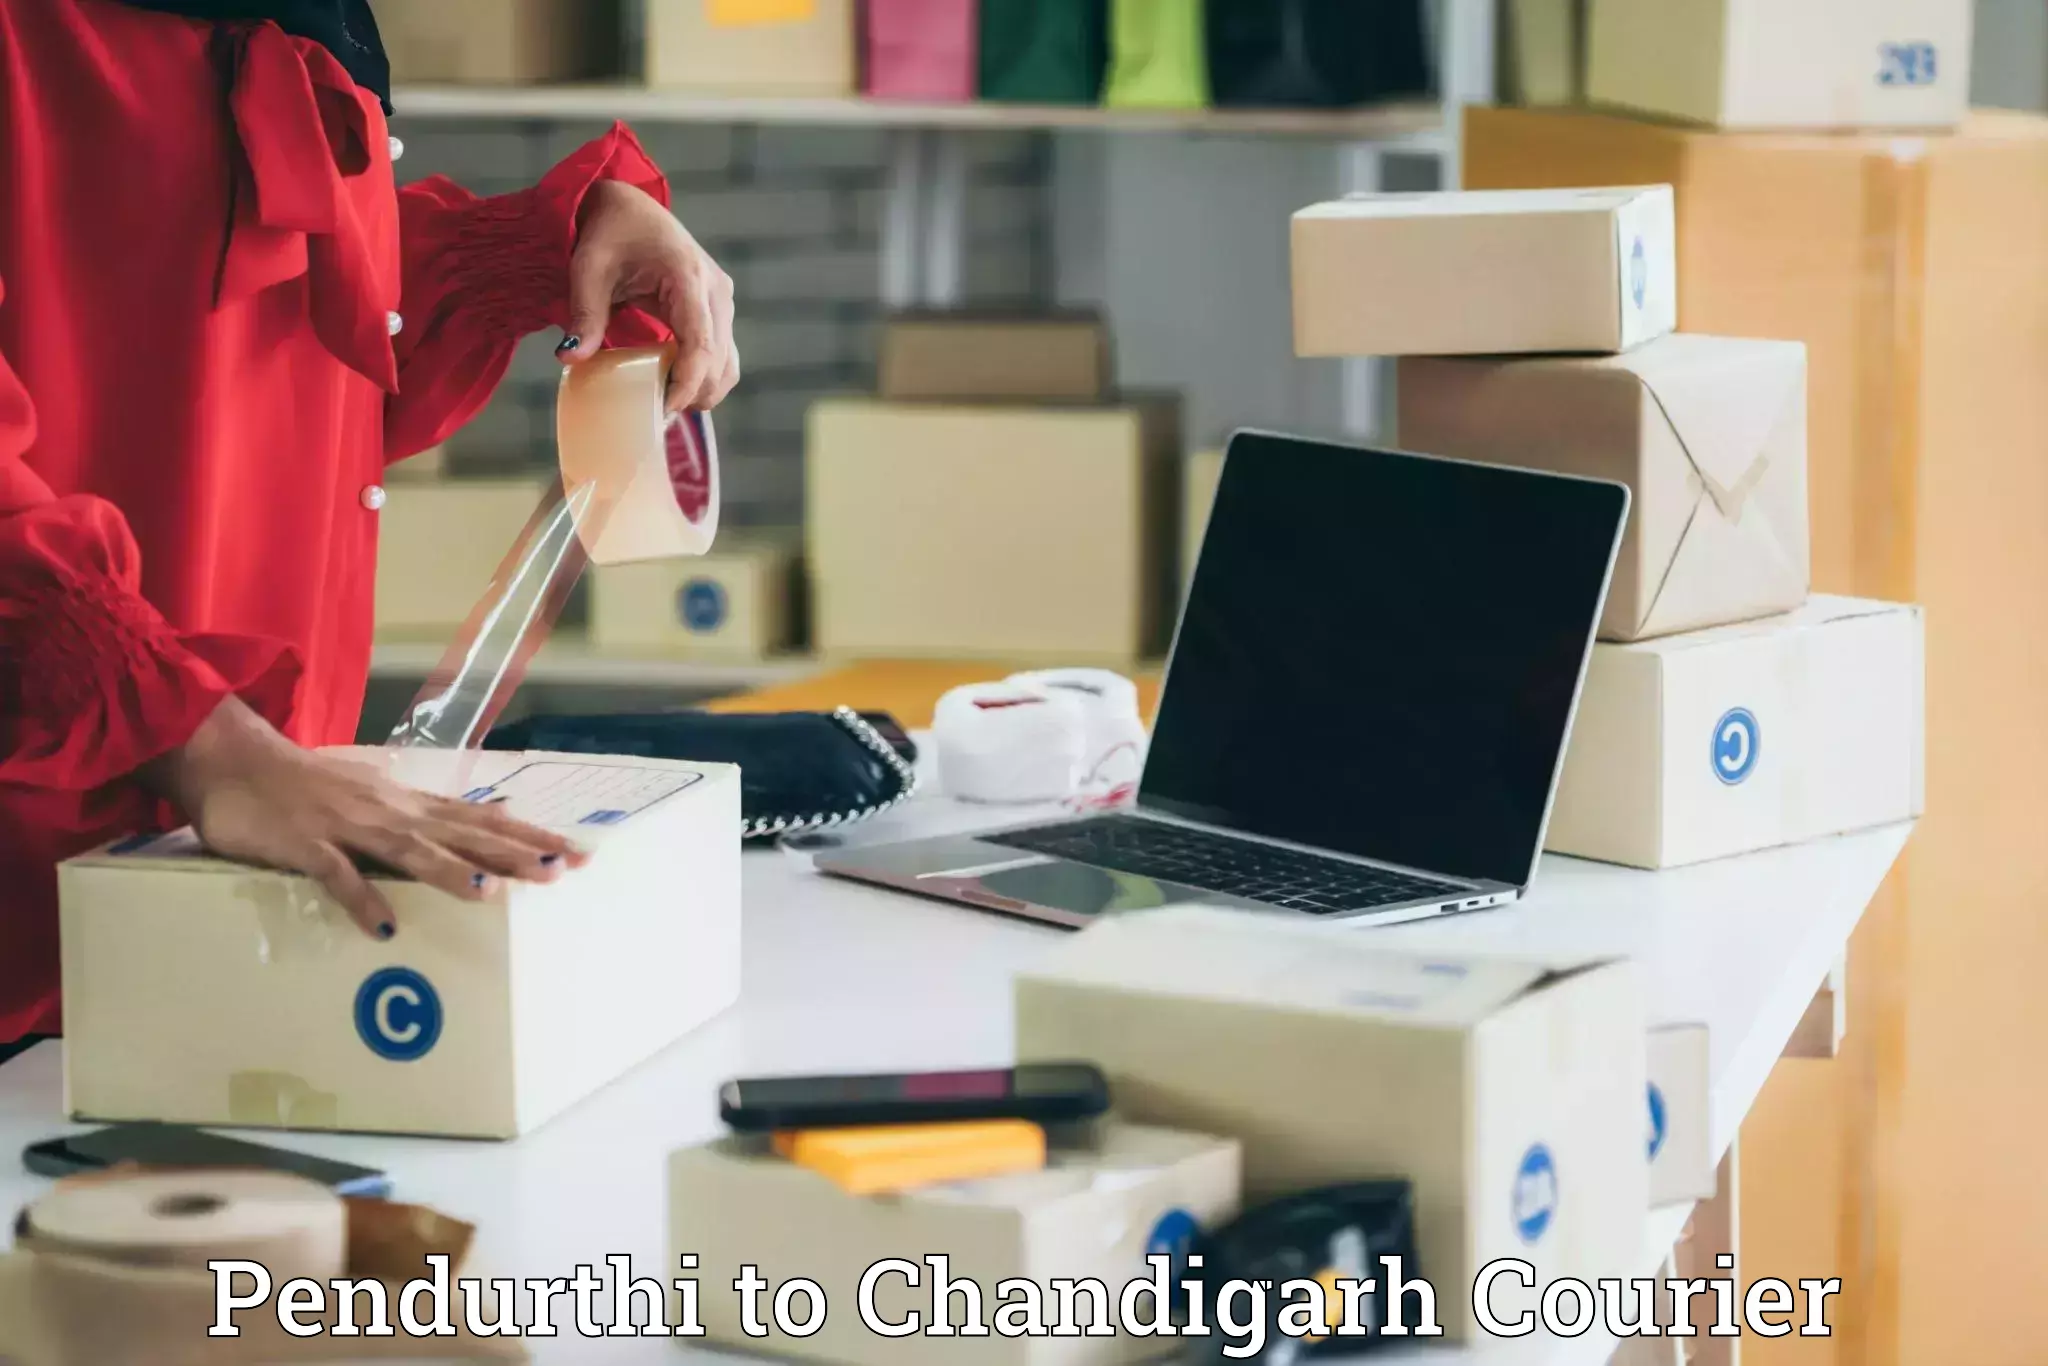 Global courier networks Pendurthi to Chandigarh